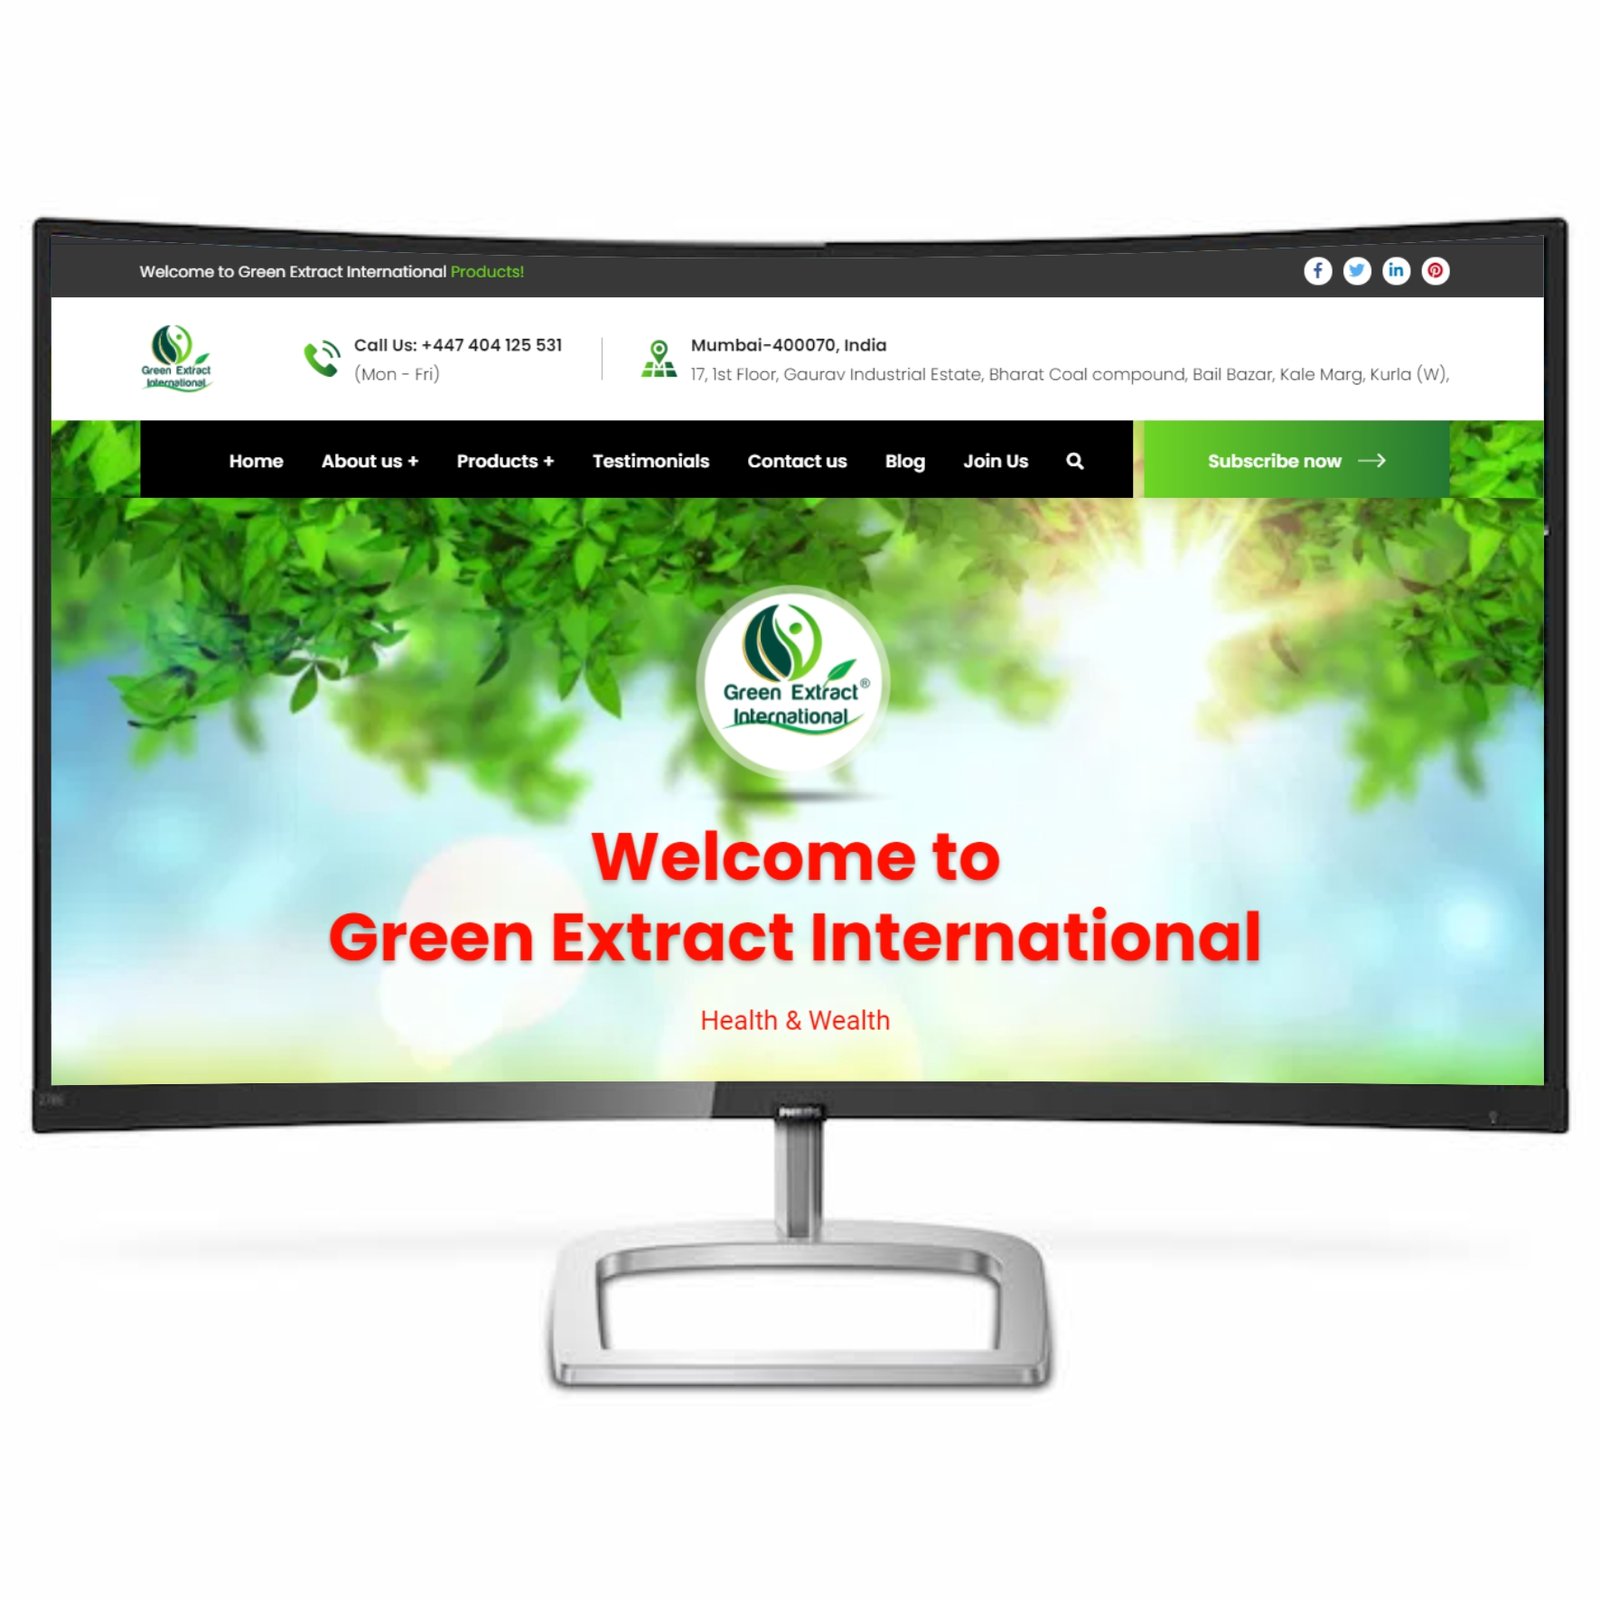 green extract products website